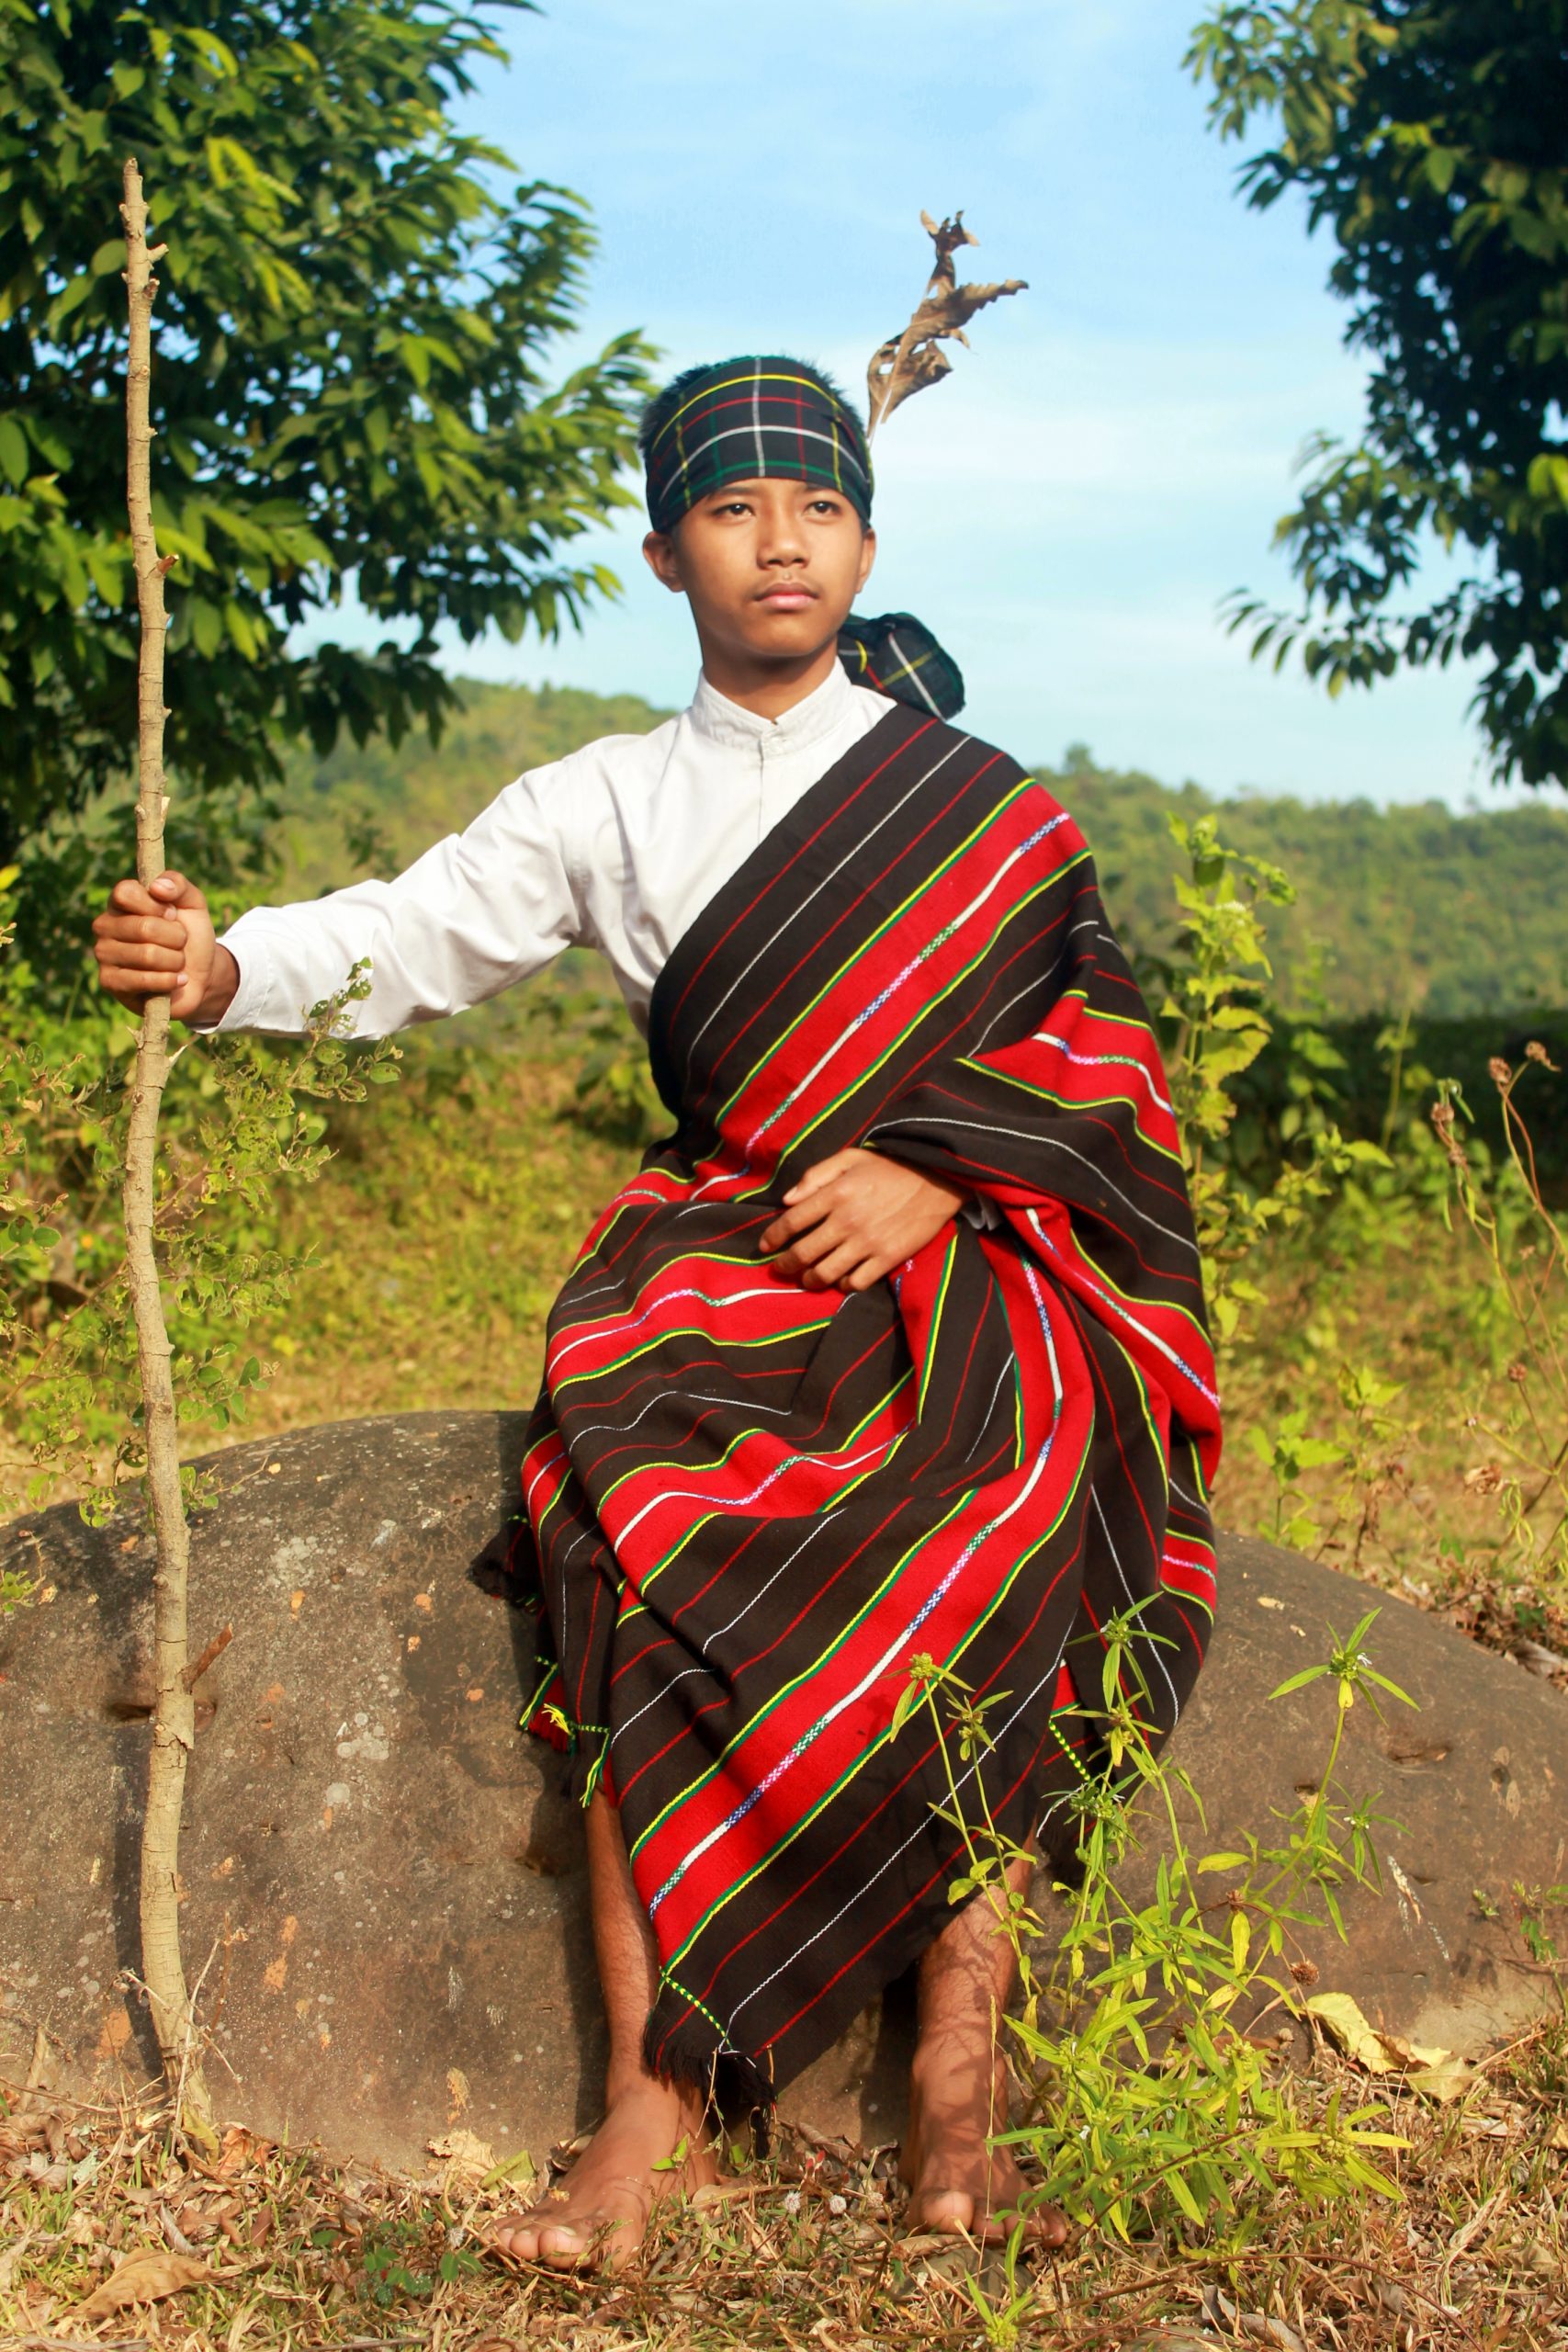 A chief of tribal people